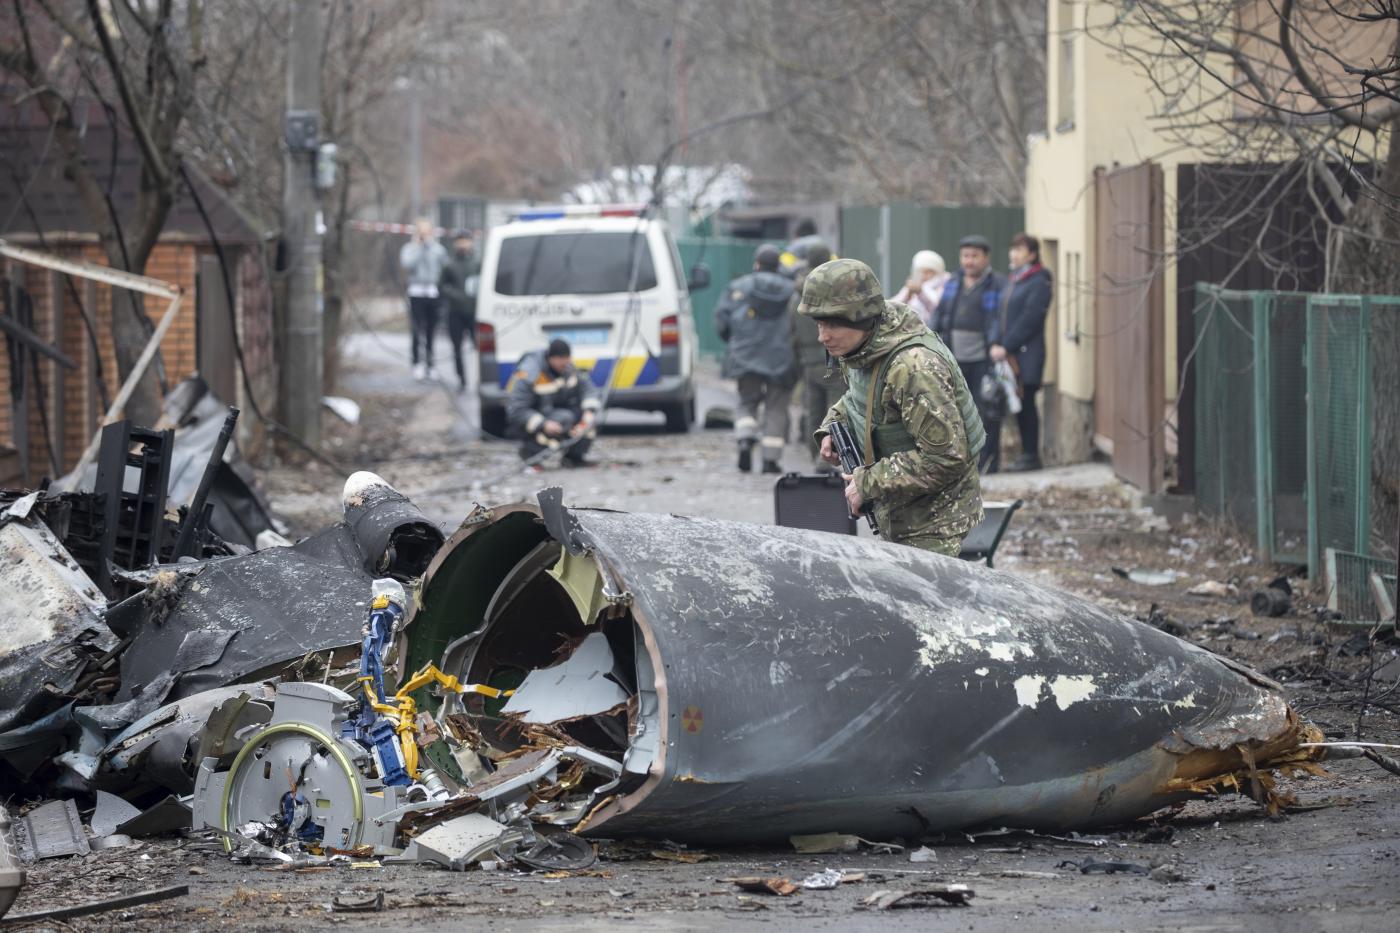 A Ukrainian Army soldier inspects fragments of a downed aircraft in Kyiv, Ukraine, Friday, Feb. 25, 2022. It was unclear what aircraft crashed and what brought it down amid the Russian invasion in Ukraine. Russia is pressing its invasion of Ukraine to the outskirts of the capital after unleashing airstrikes on cities and military bases and sending in troops and tanks from three sides. (AP Photo/Vadim Zamirovsky)
